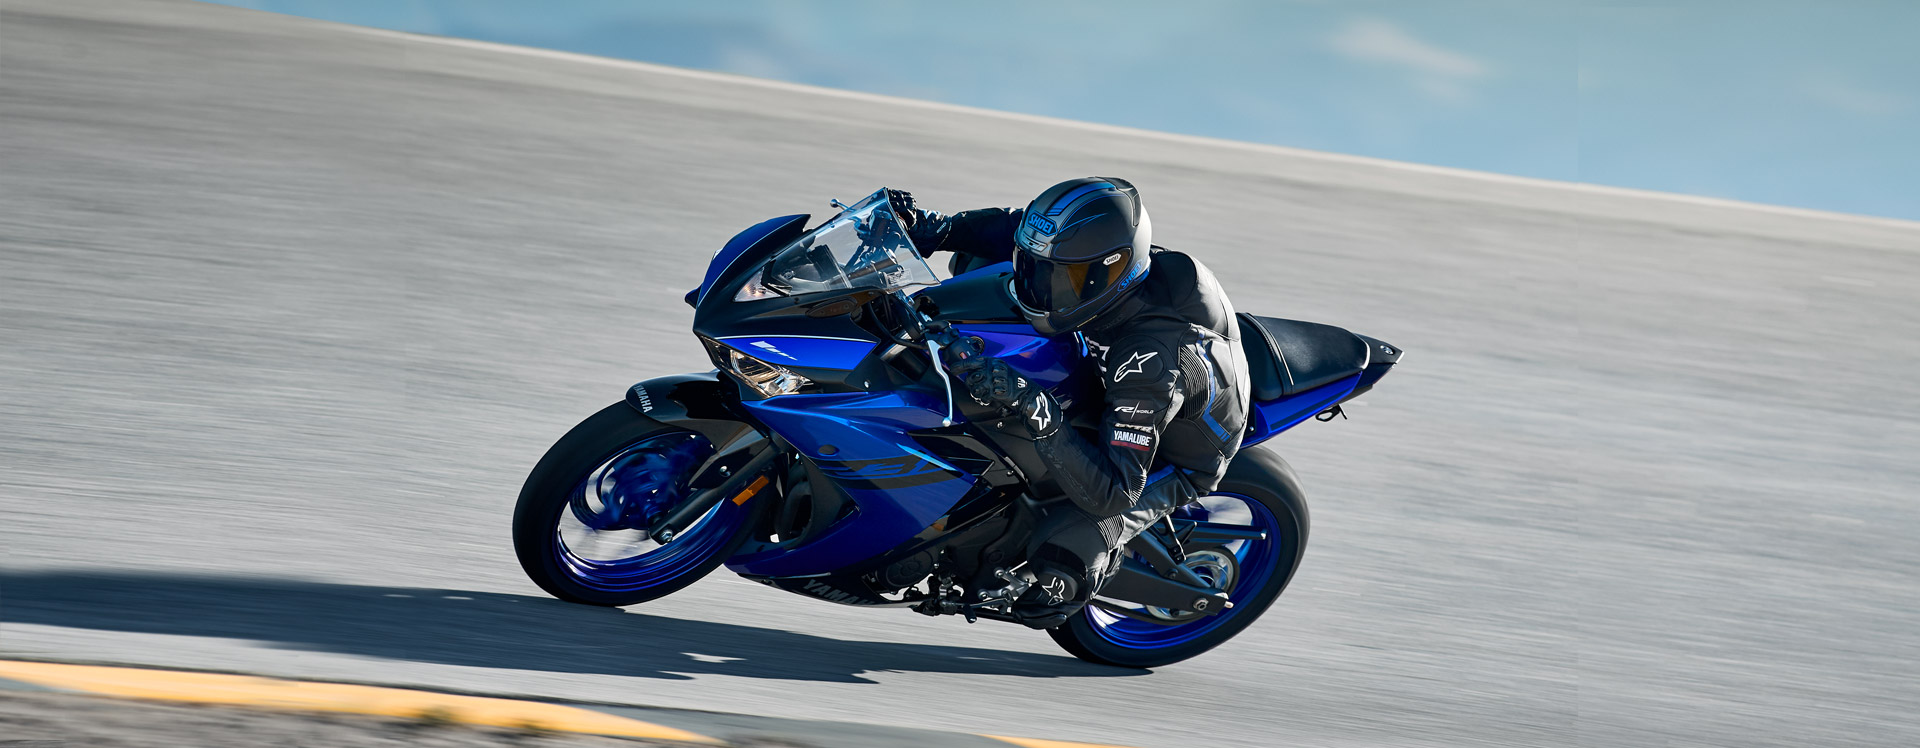 2018 Yamaha Yzf R3 Supersport Motorcycle Model Home